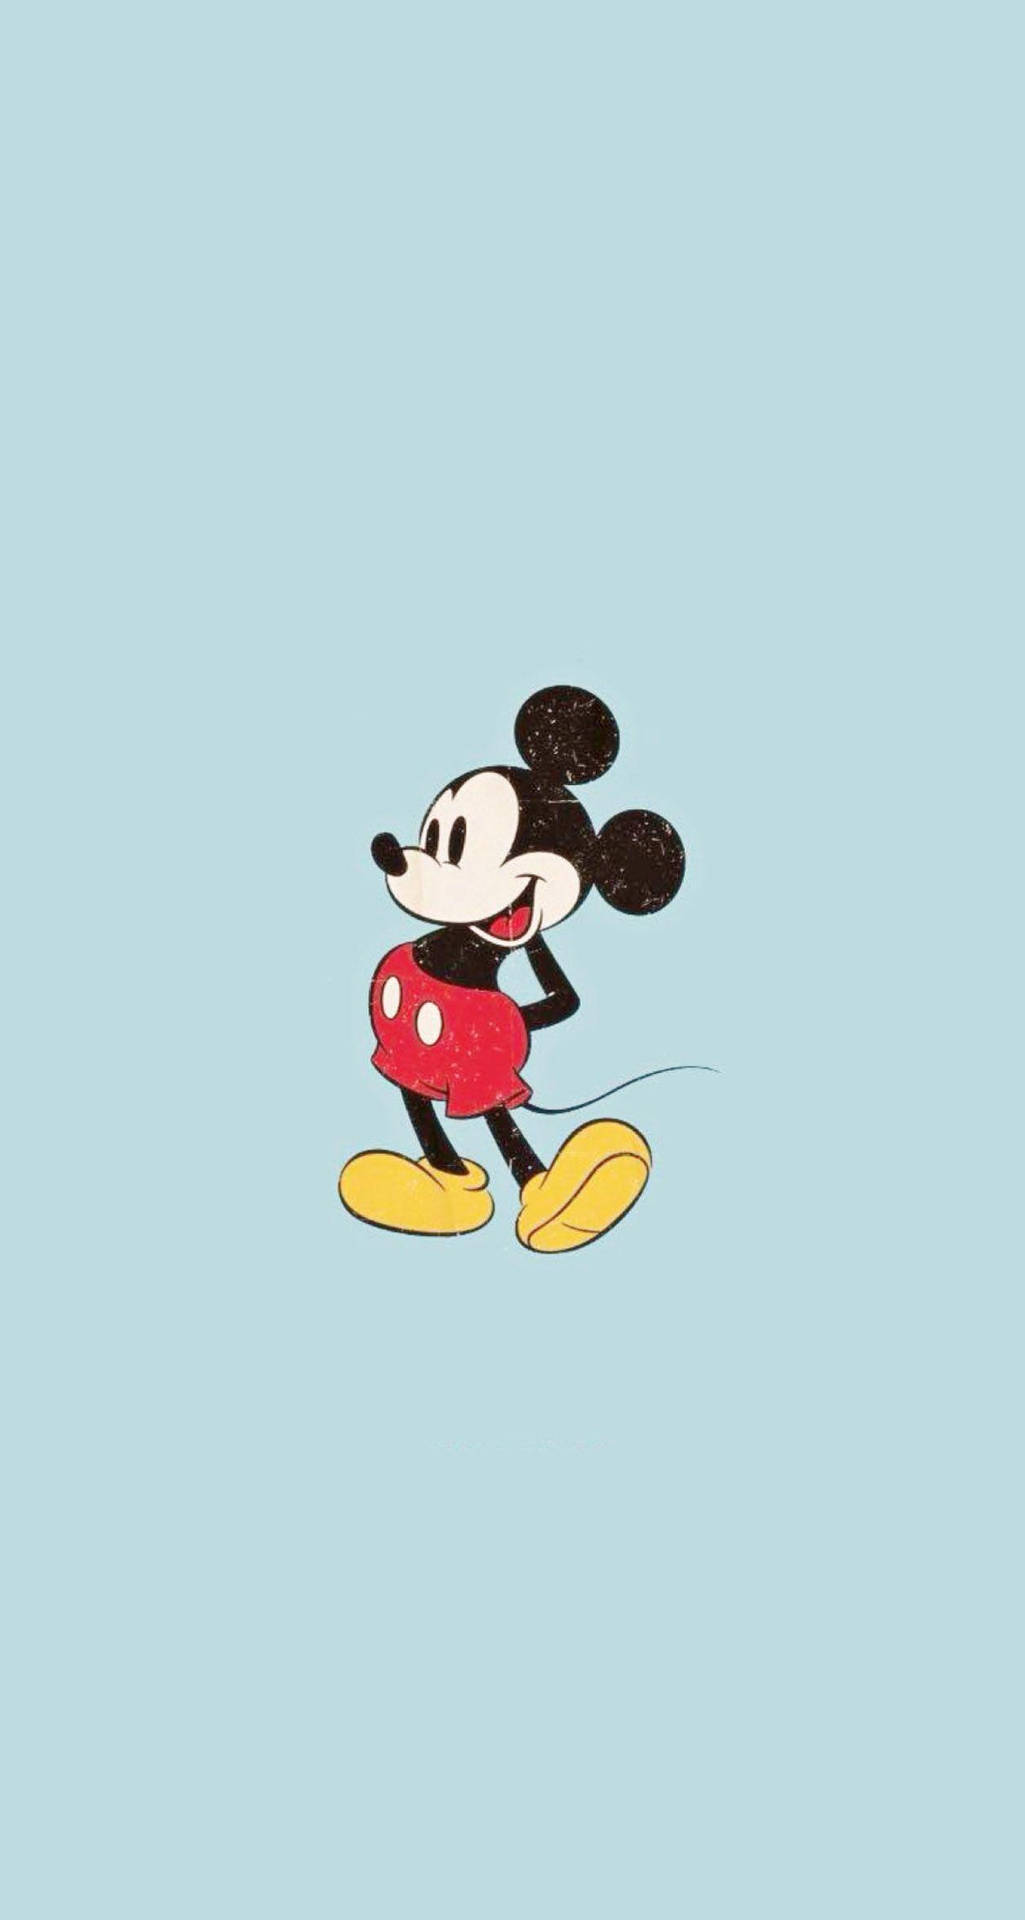 Free Mickey Mouse Iphone Wallpaper Downloads, [100+] Mickey Mouse Iphone  Wallpapers for FREE 